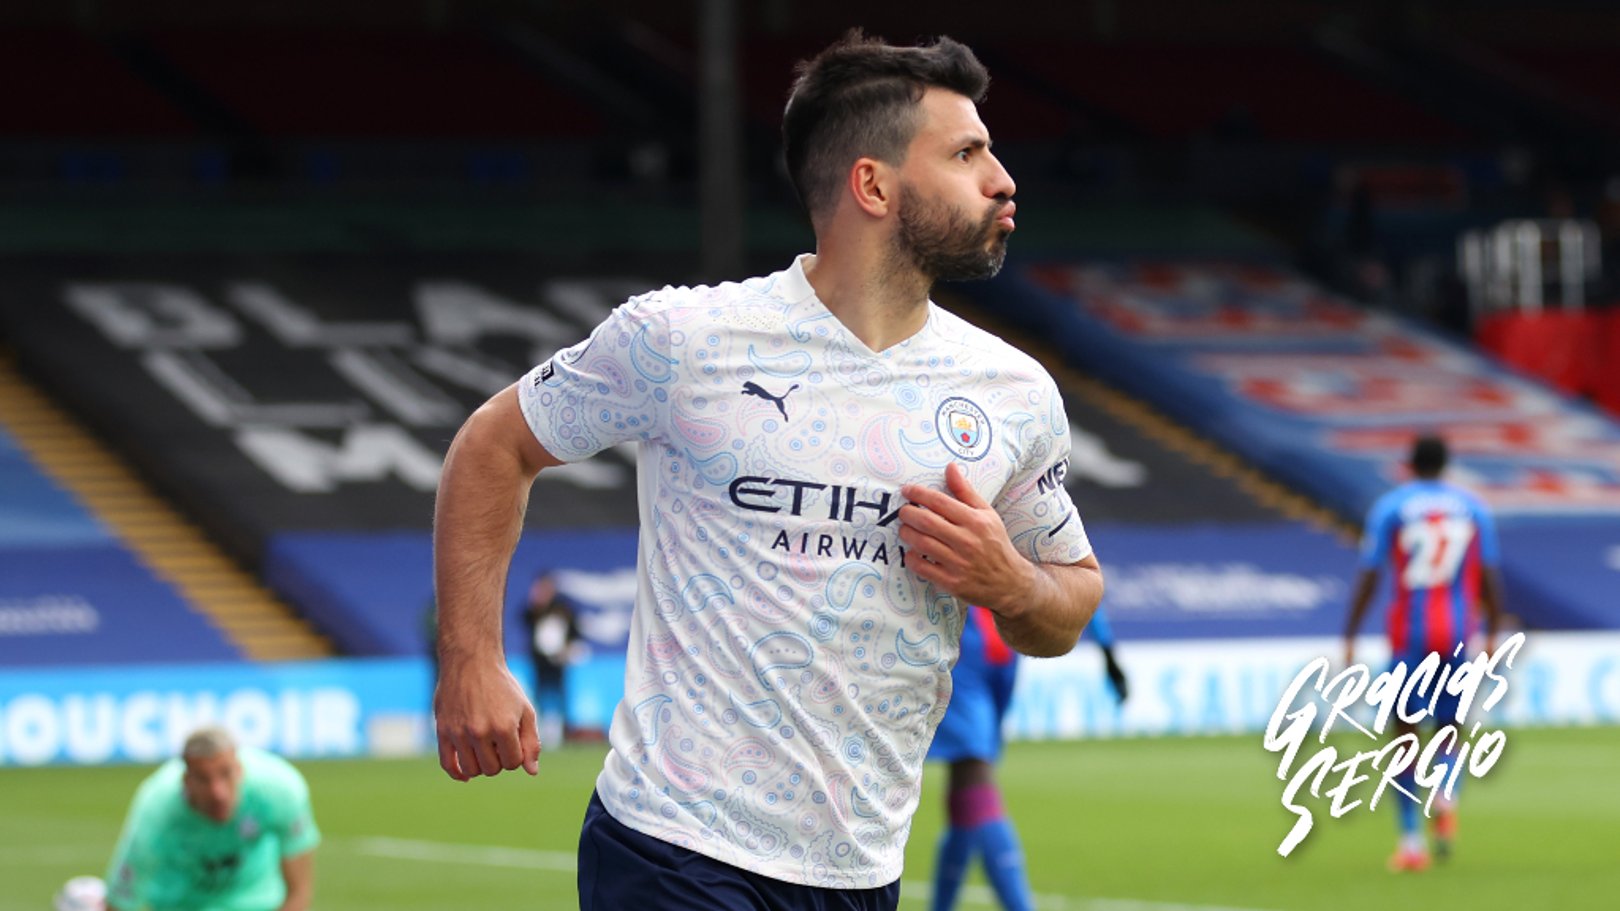 View from the pressbox: Aguero’s legacy will endure, says Winter